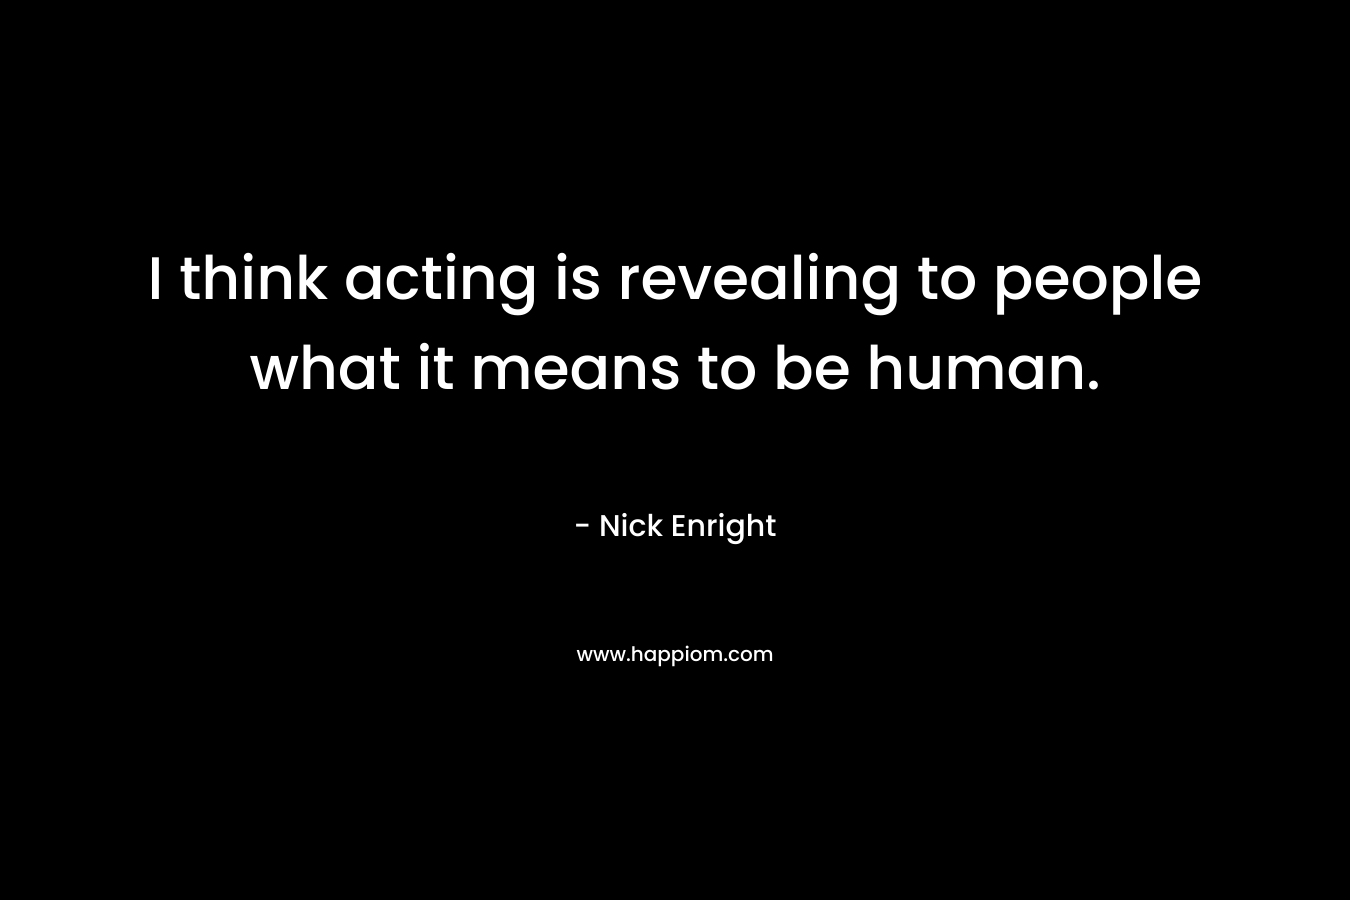 I think acting is revealing to people what it means to be human.